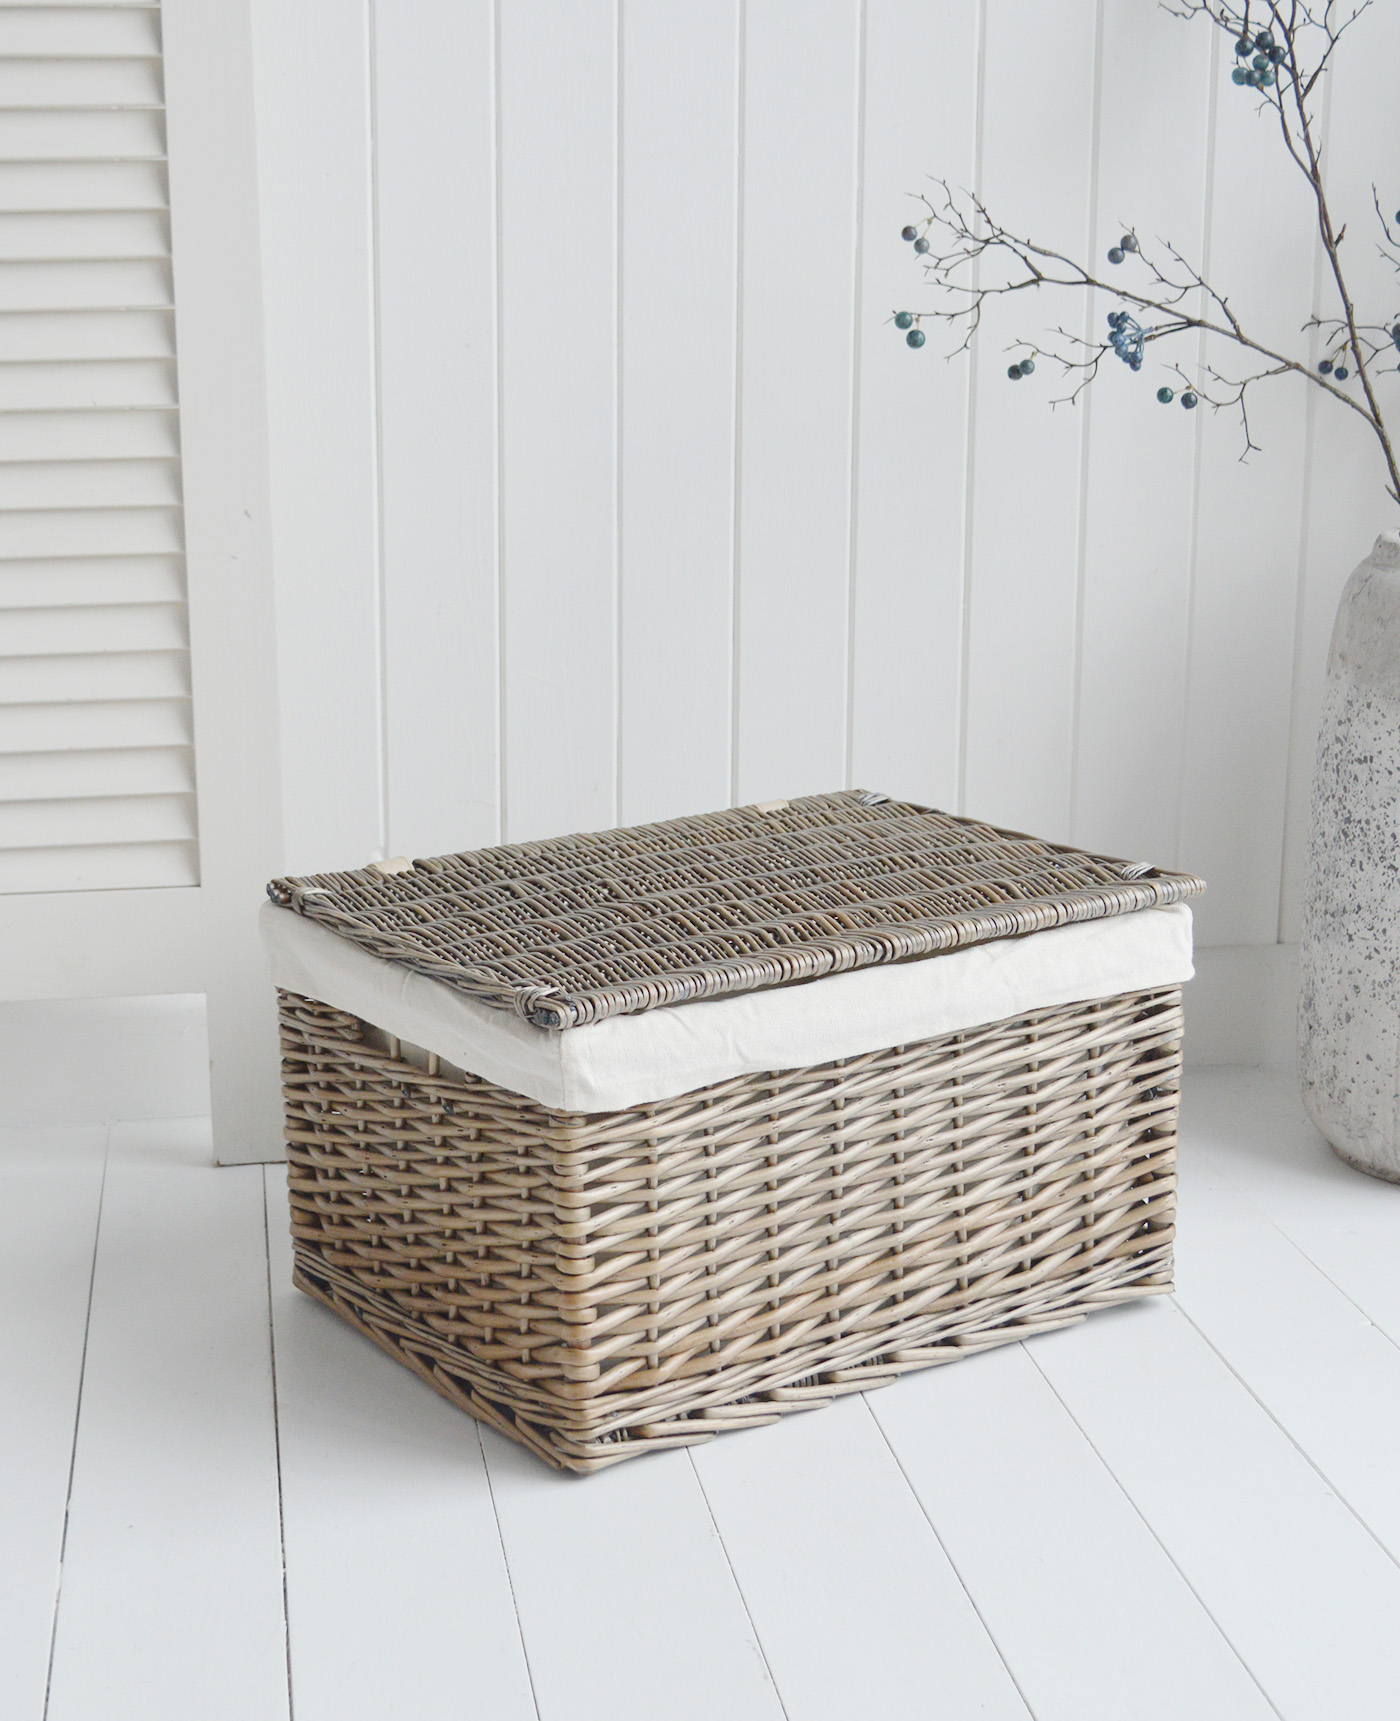 Harrow Picnic style basket hamper with lid from The White Lighthouse Furniture. New England, country, coastal, city and whie home interiors. Hallway, Bedroom , Bathroom and living room